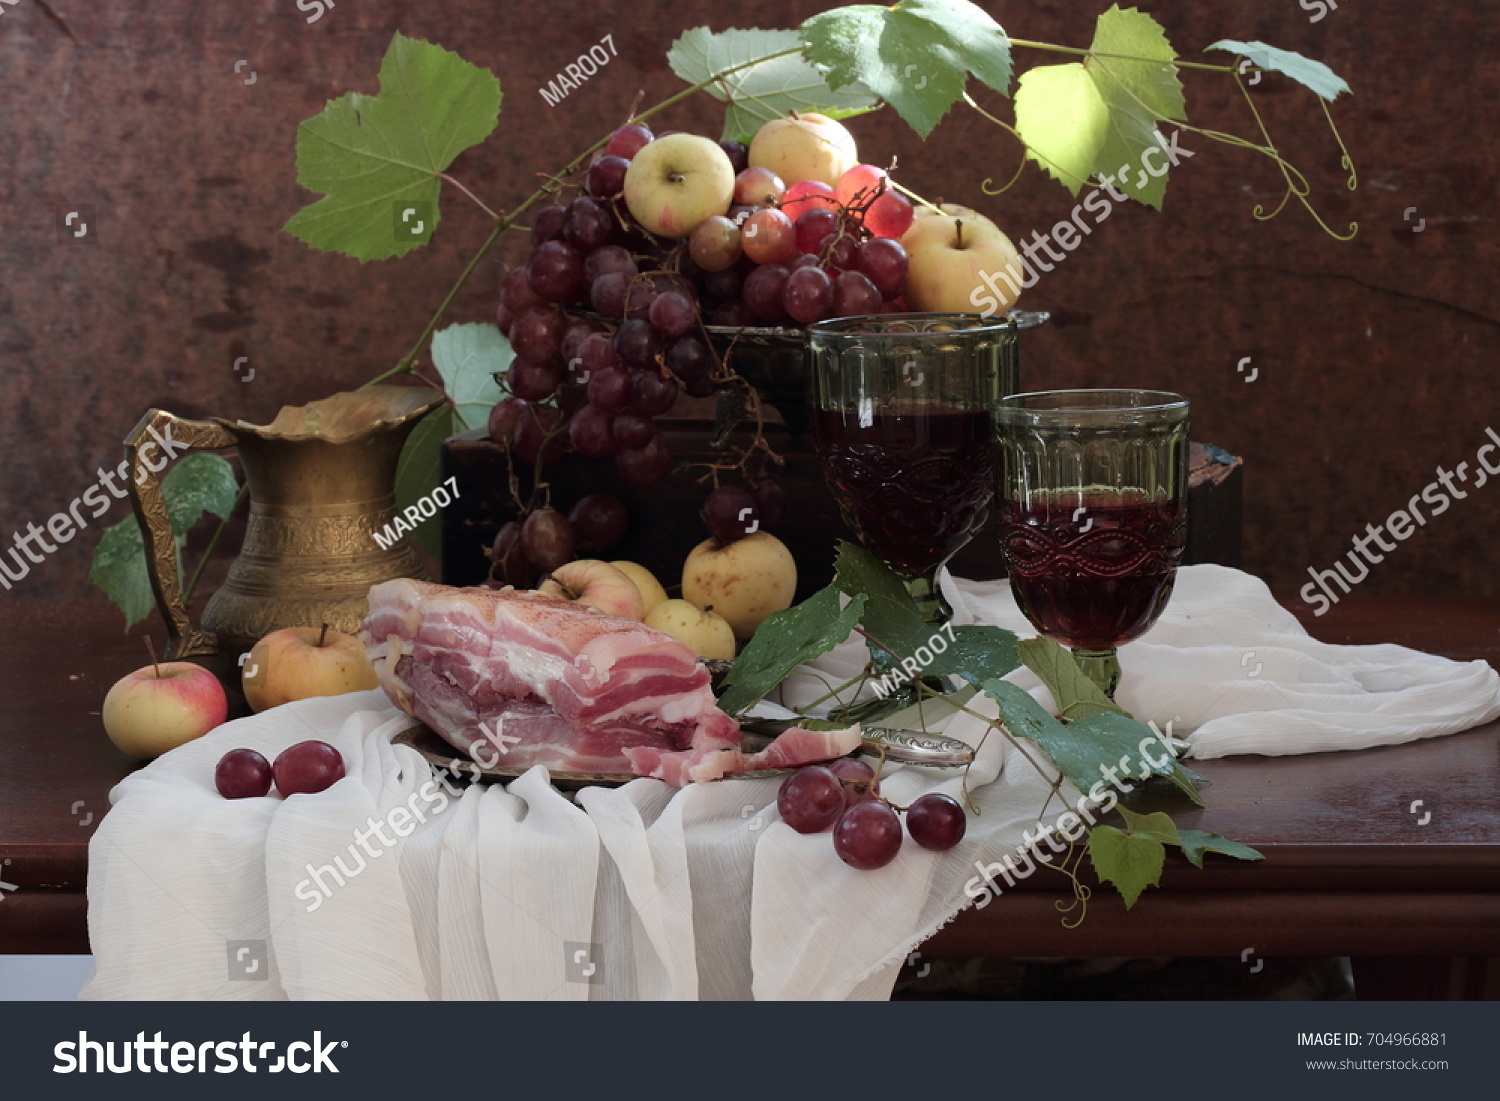 brisket country - style and red wine with fruits on wooden table
 #704966881